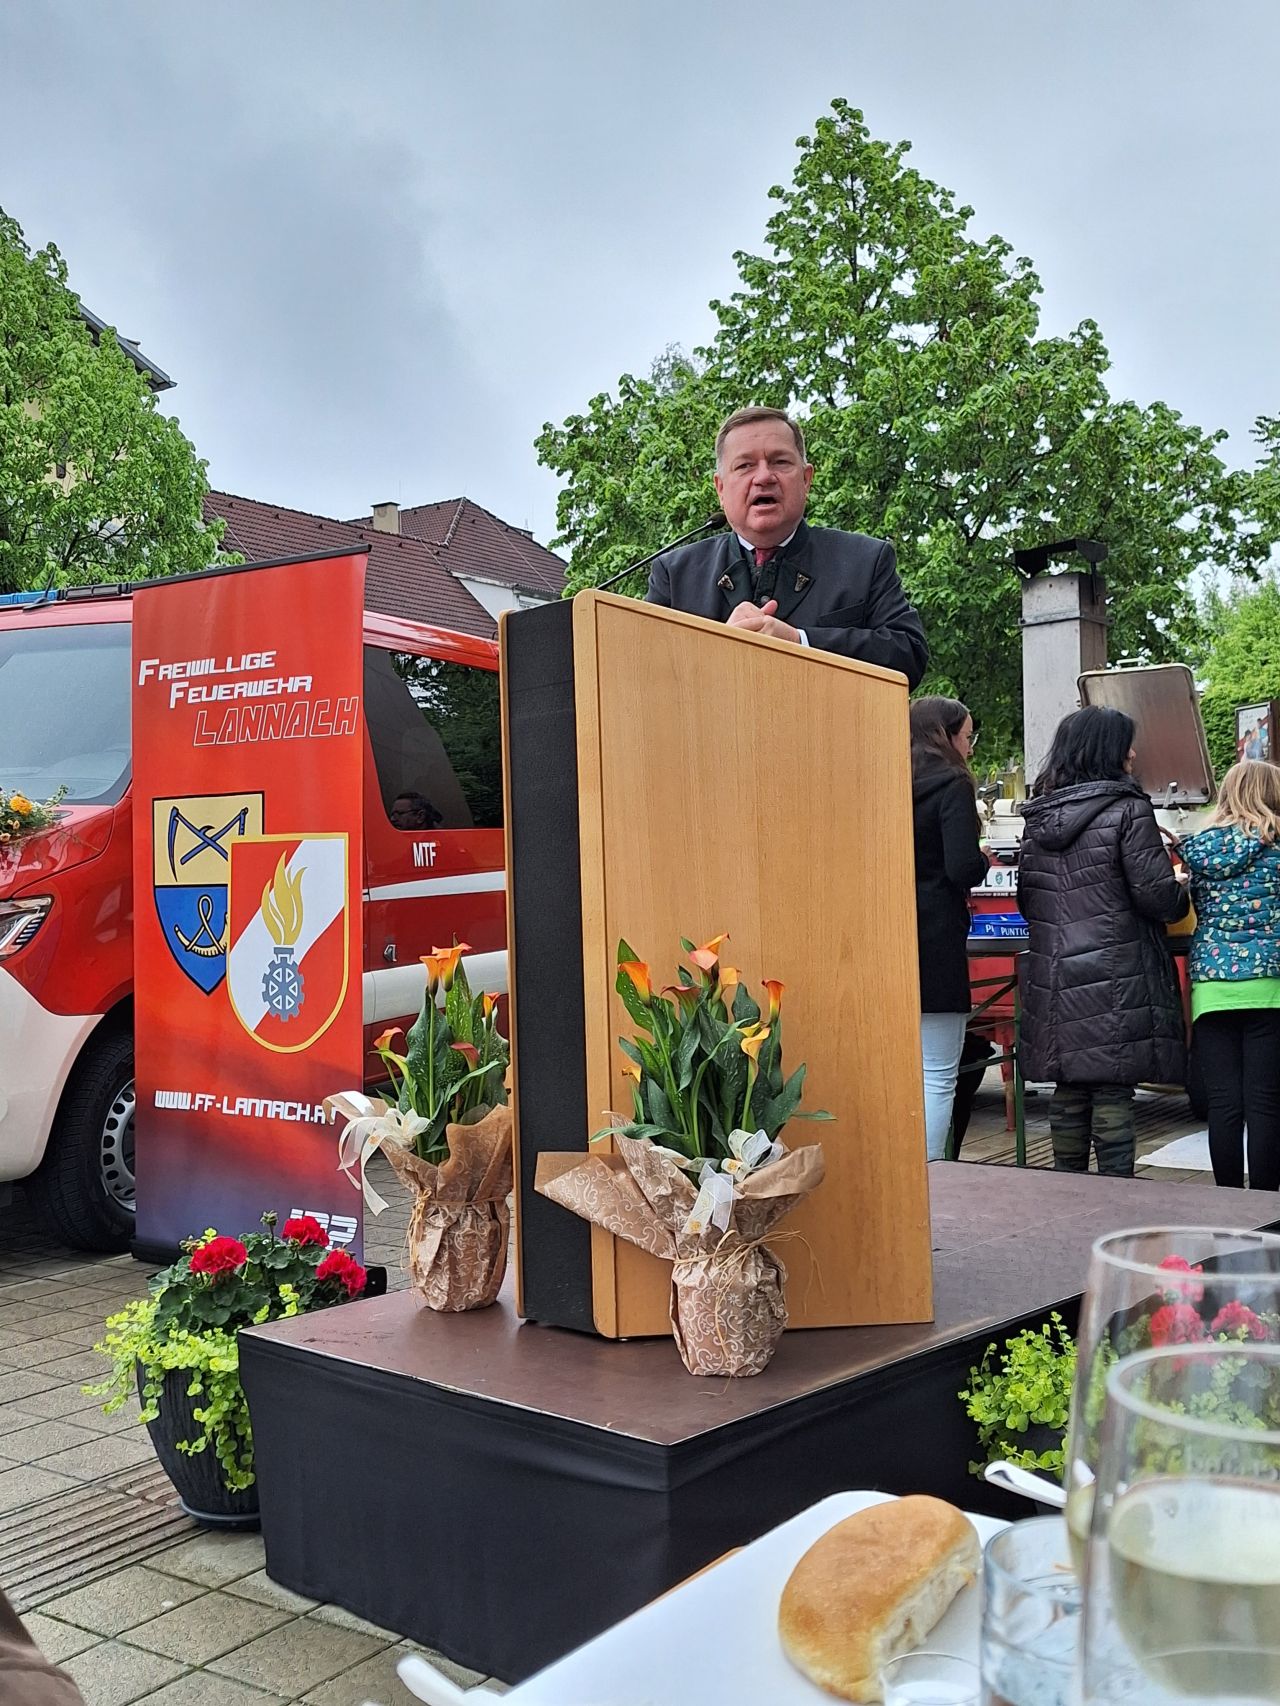 Minister Werner Amon addressing attendees of the blessing of a fire engine.